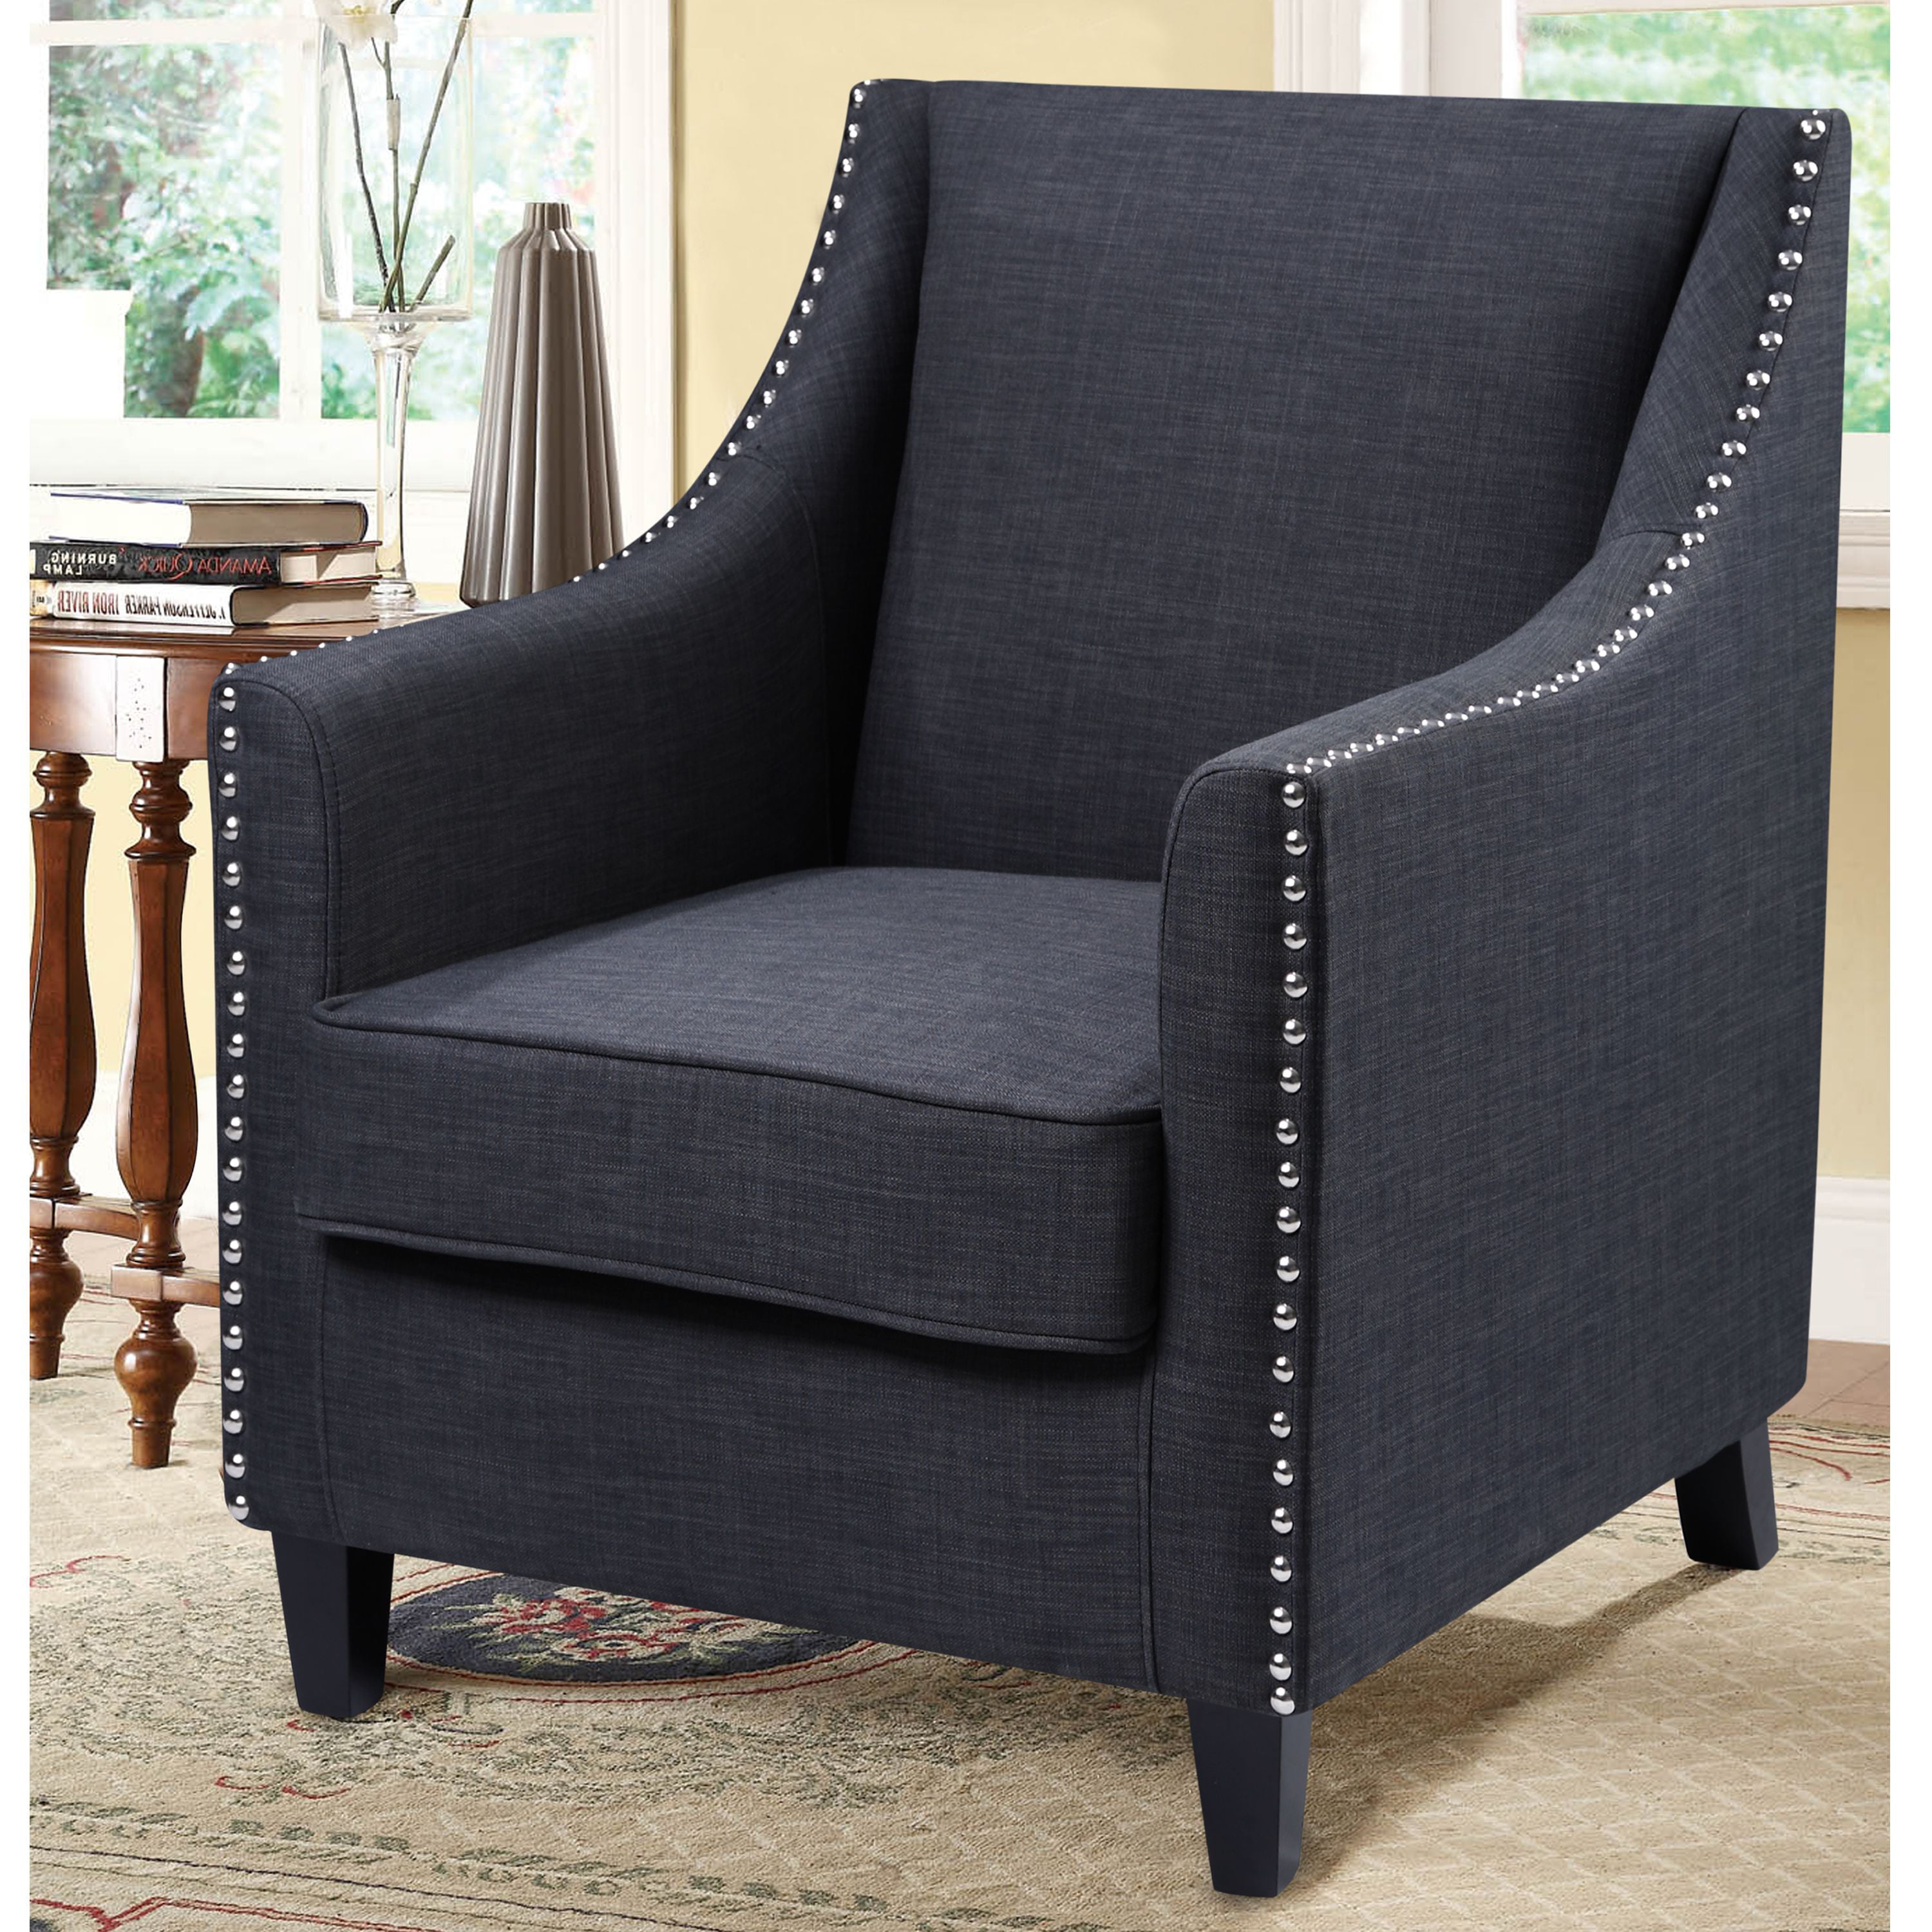 Best Master Furniture's Cottage Tufted Fabric Accent Chair, Available